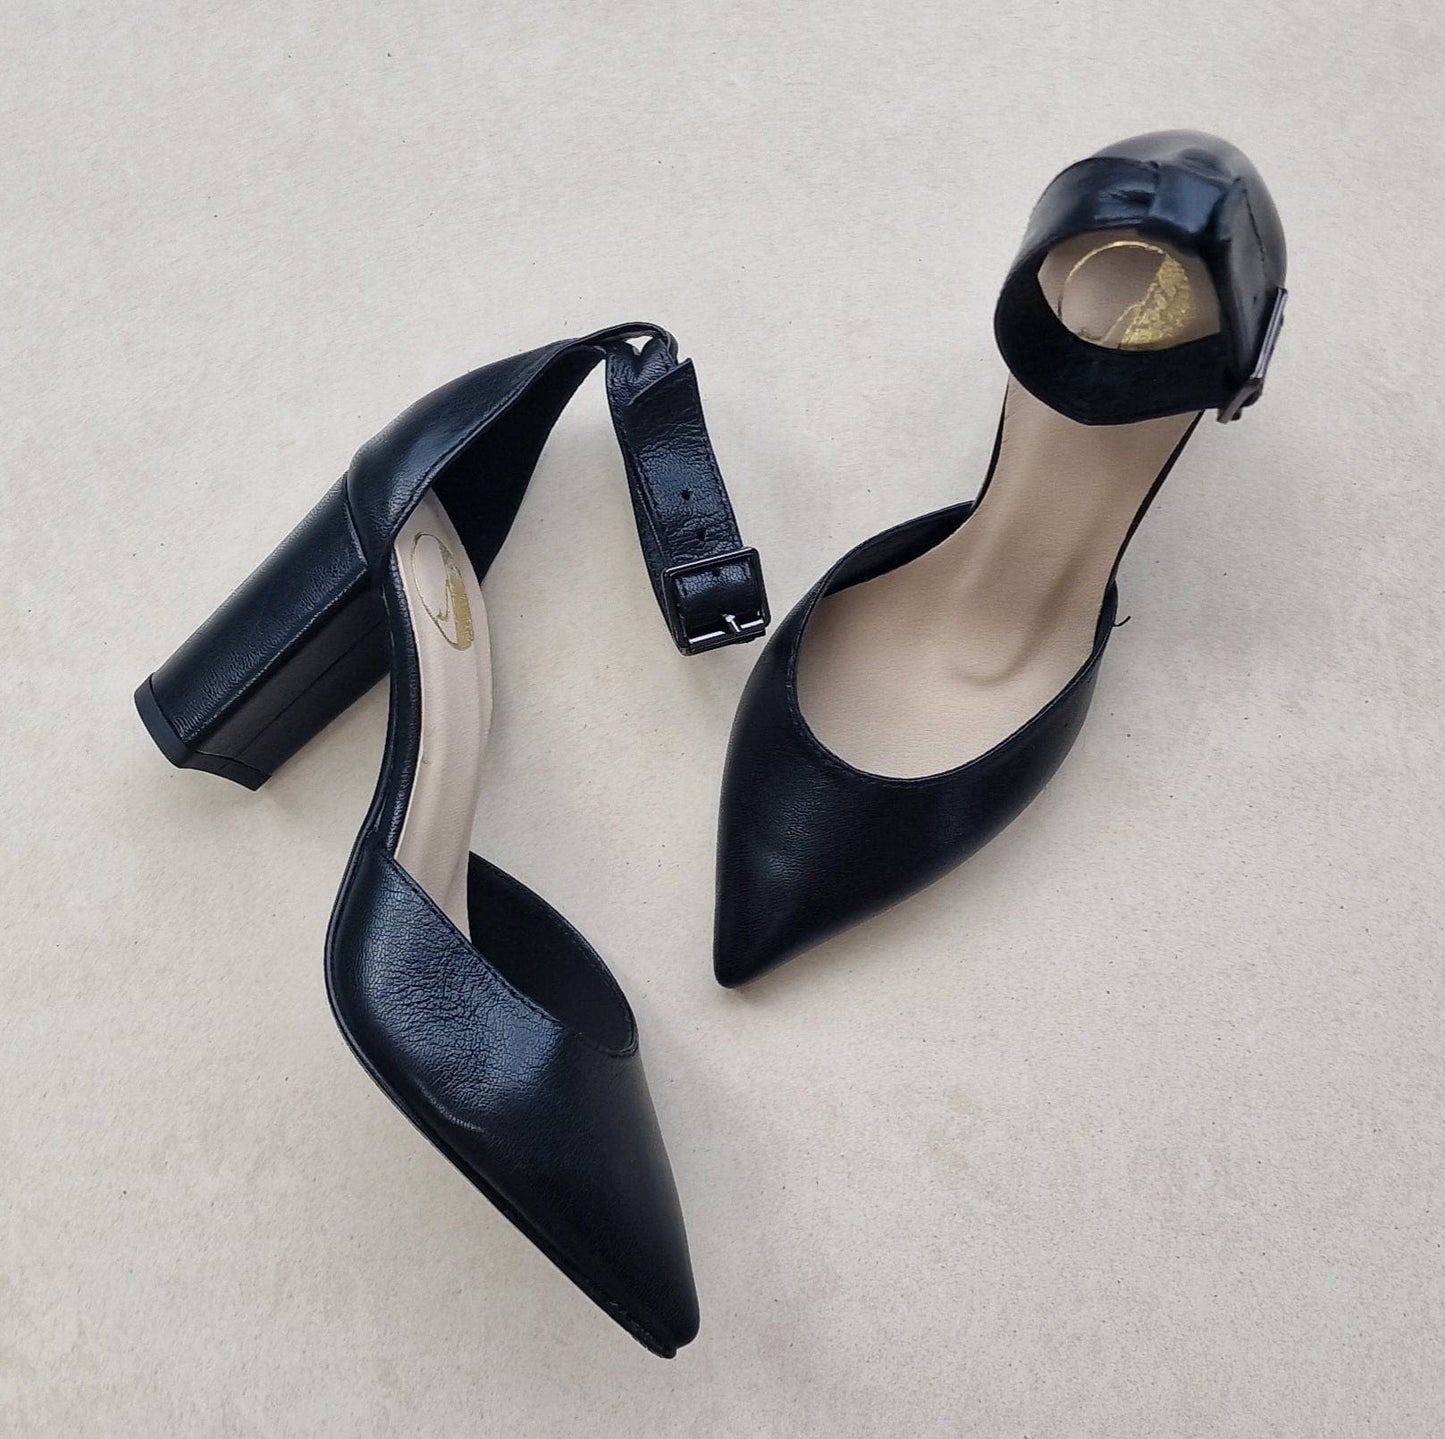 Pointed toe black leather court shoes with ankle strap